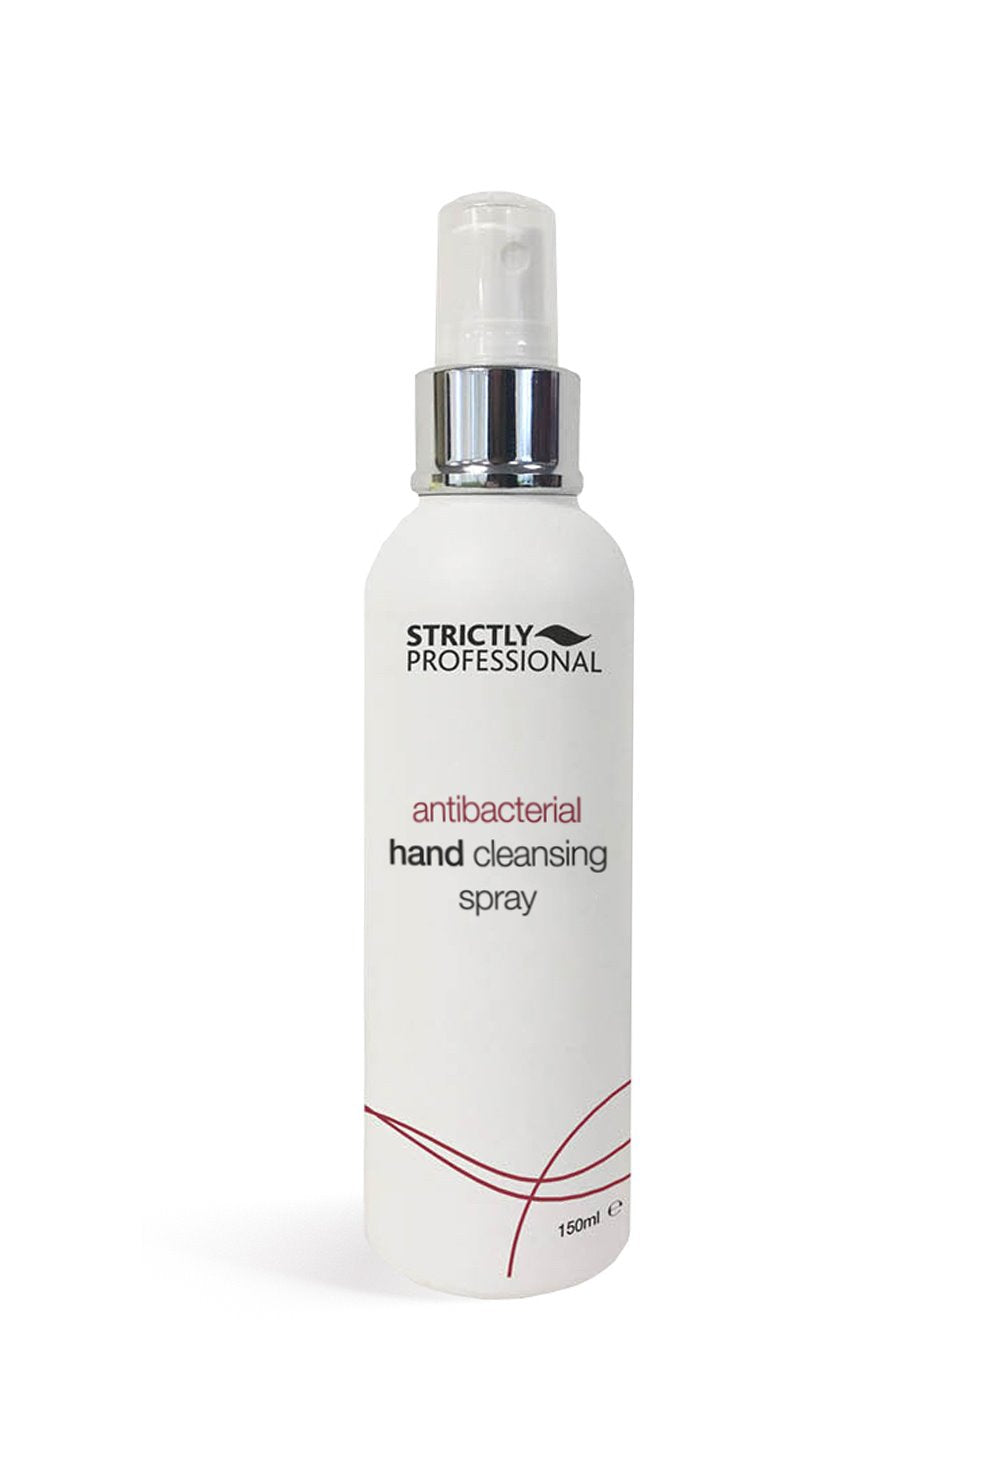 Strictly Professional Antibacterial Hand Cleansing Spray 150ml - Ultimate Hair and Beauty